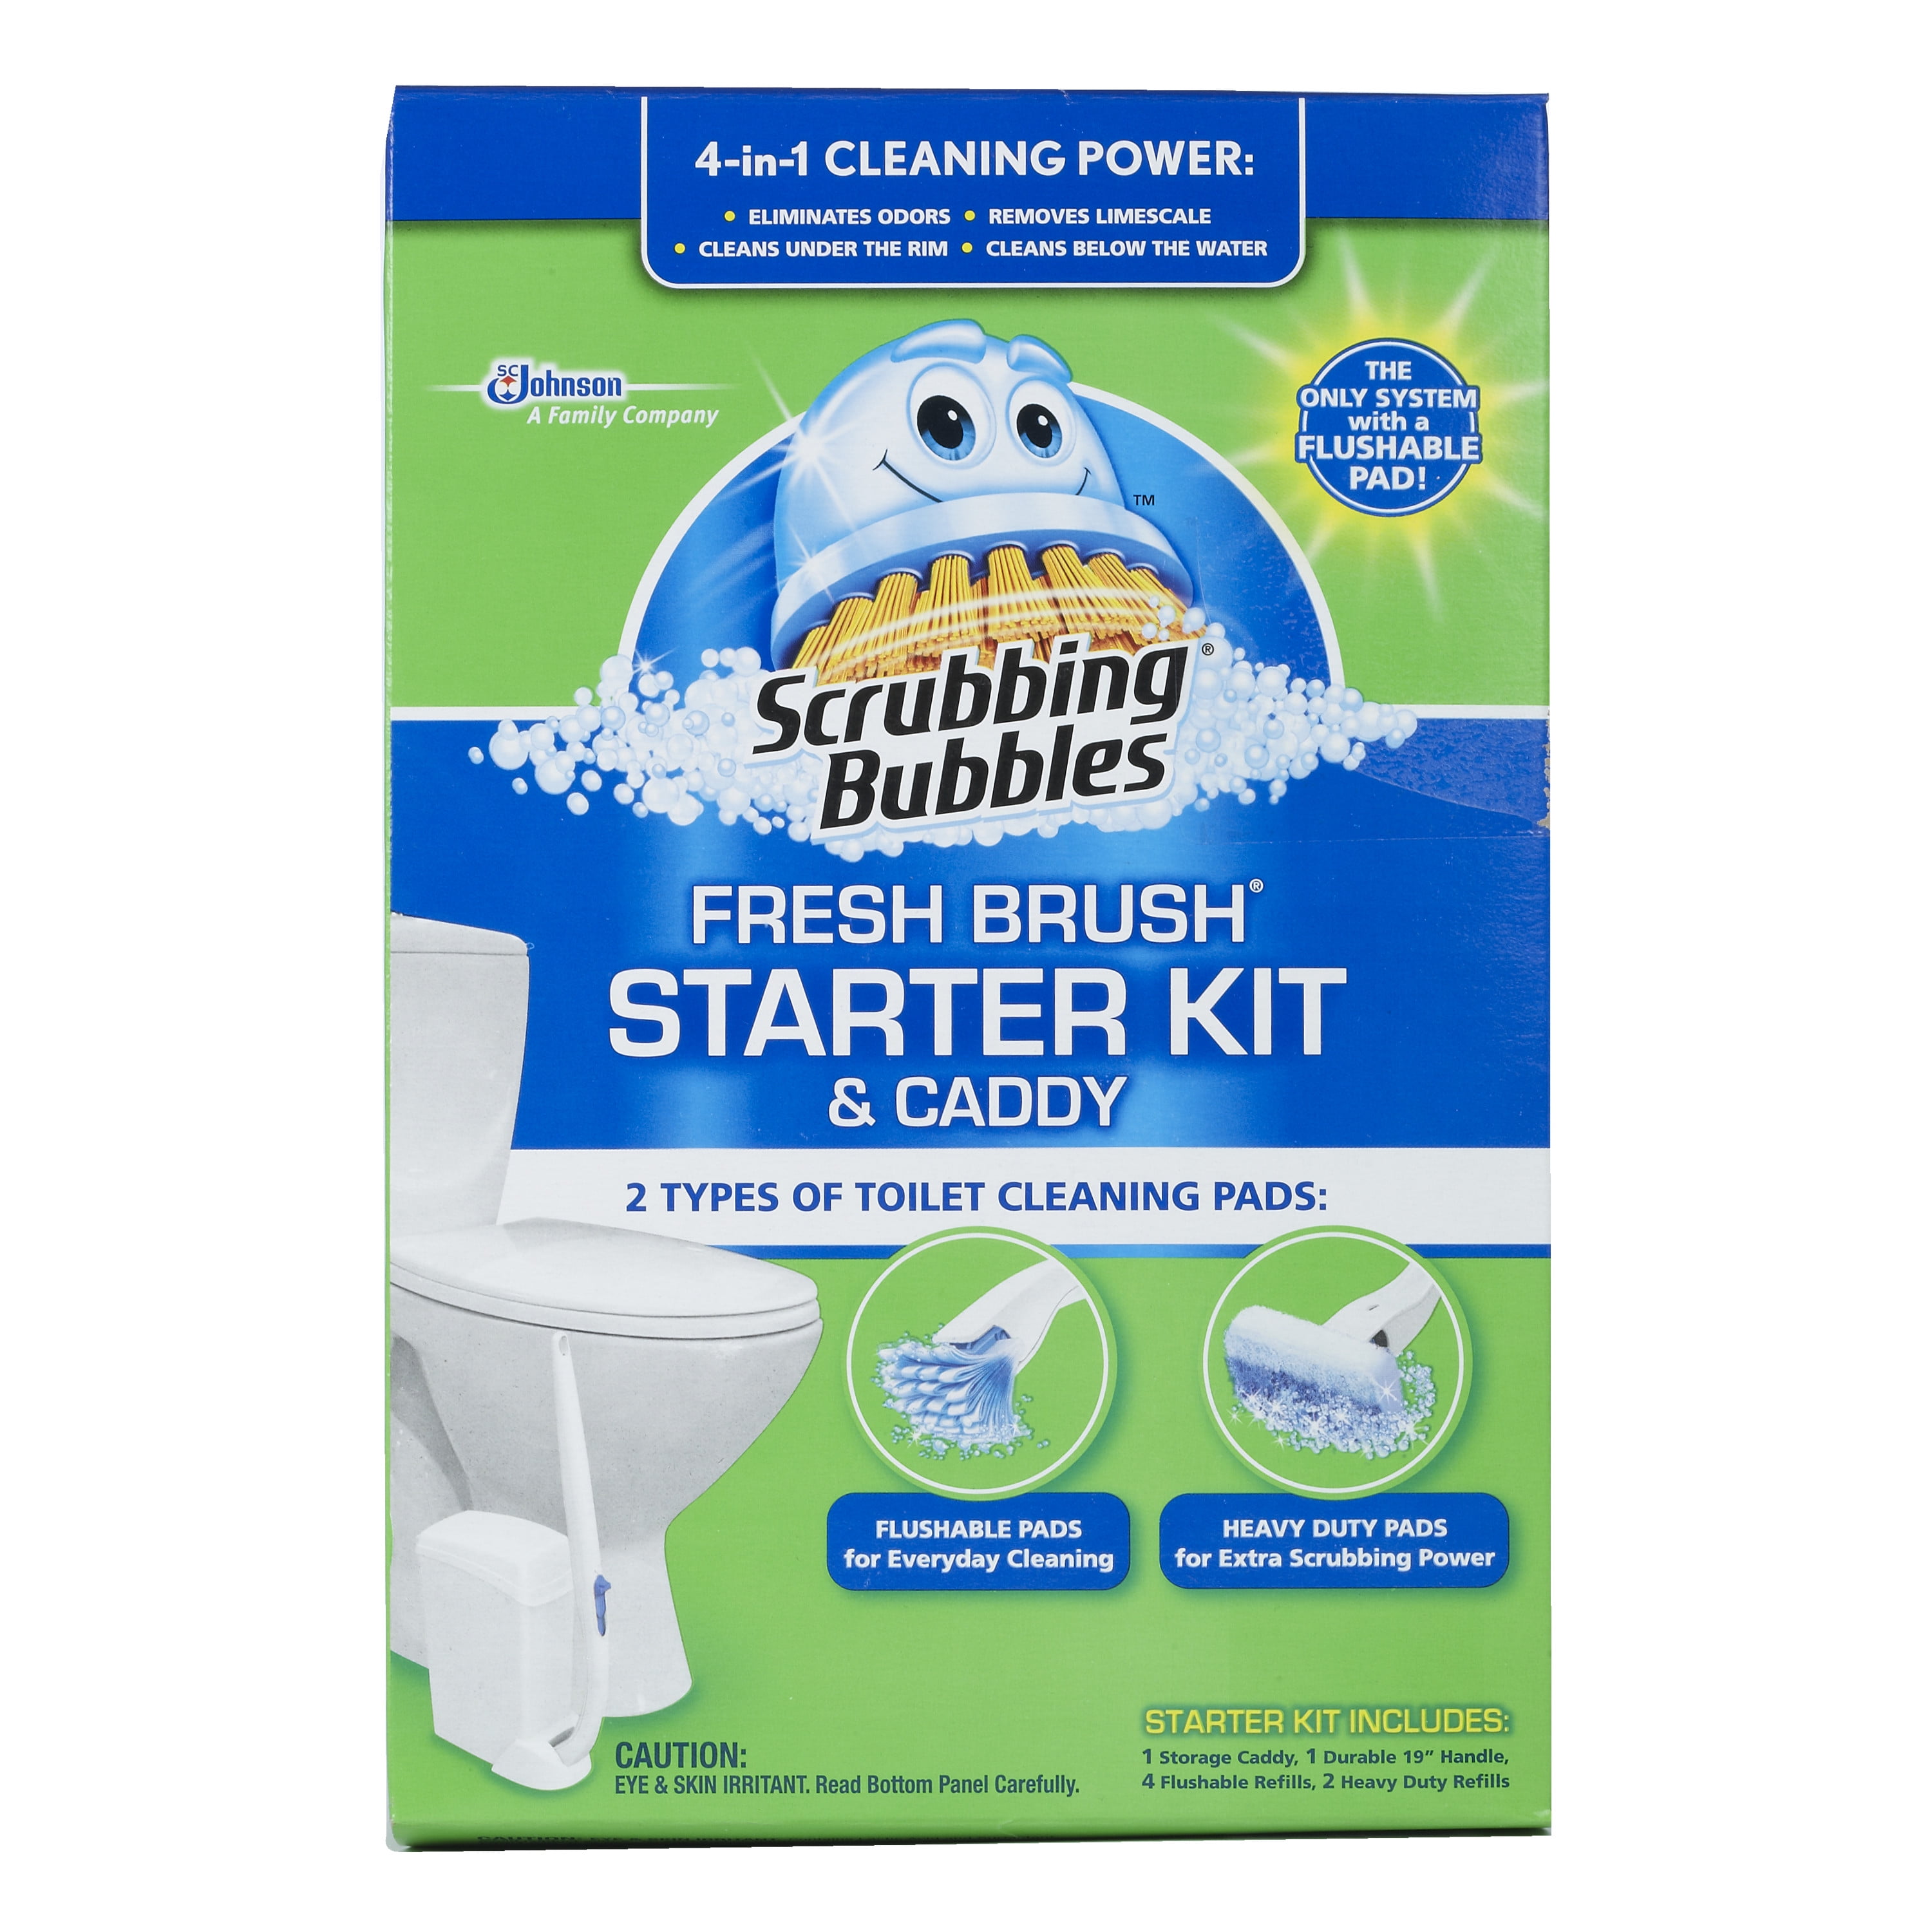 Scrubbing Bubbles Fresh Brush Starter Kit, Citrus - Toilet Cleaning System  with Flushable Pads (19 Inch Handle, 4 Pads and 1 Stand)